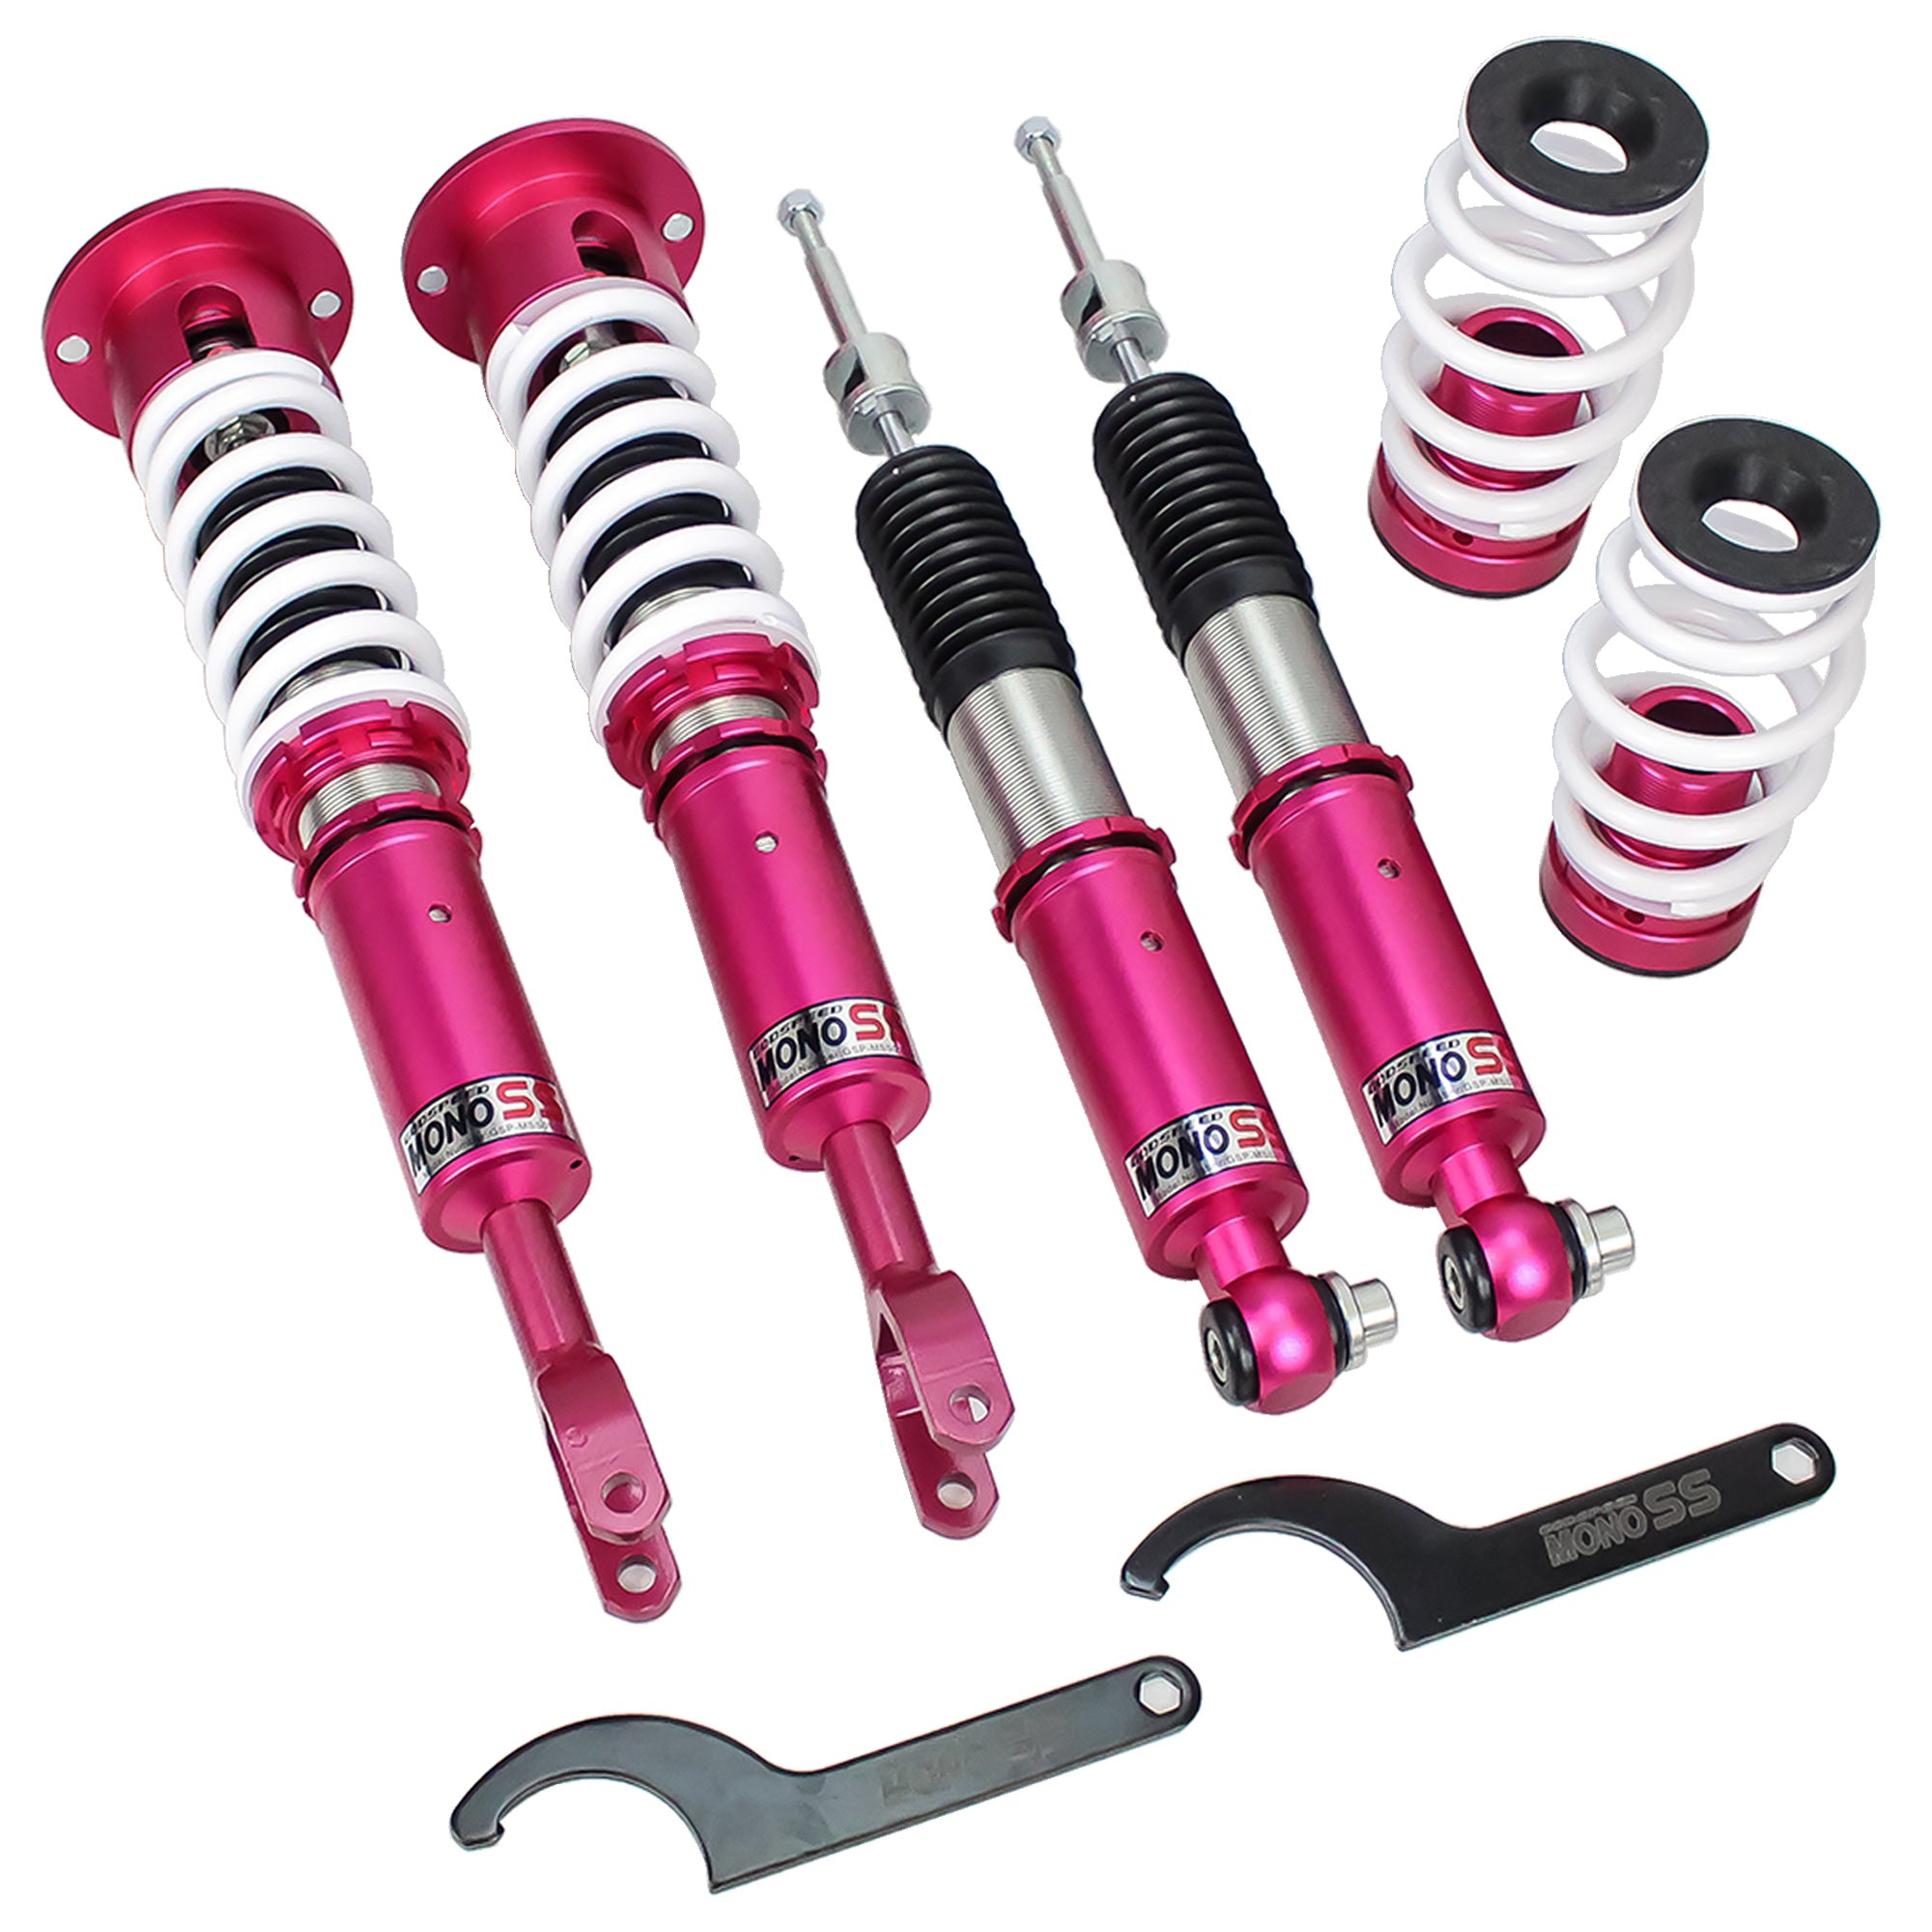 Godspeed MSS0122 MonoSS Coilover Lowering Kit, Fully Adjustable, Ride Height, Spring Tension And 16 Click Damping, Volkswagen Passat(B5) FWD 1996-05